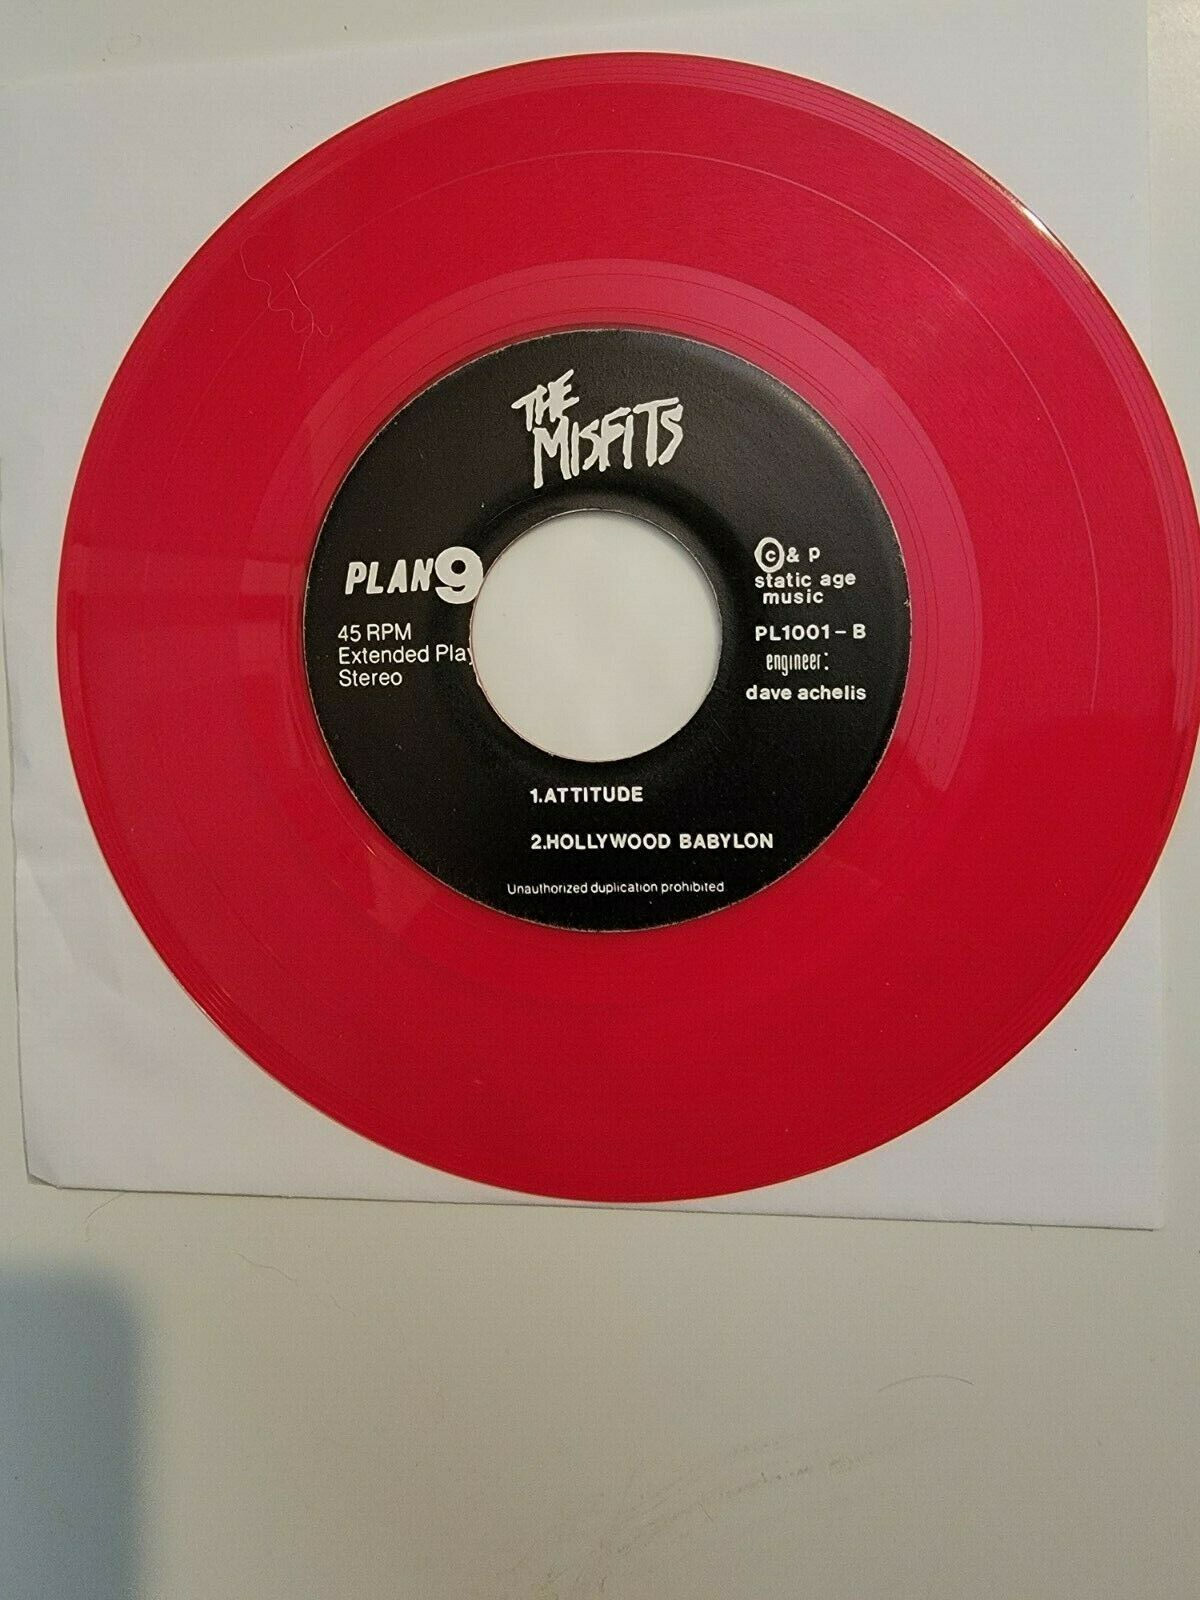 Pic 2 The Misfits - Bullet 7" Vinyl - Better Dead on Red - Press 1000 -Translucent Red